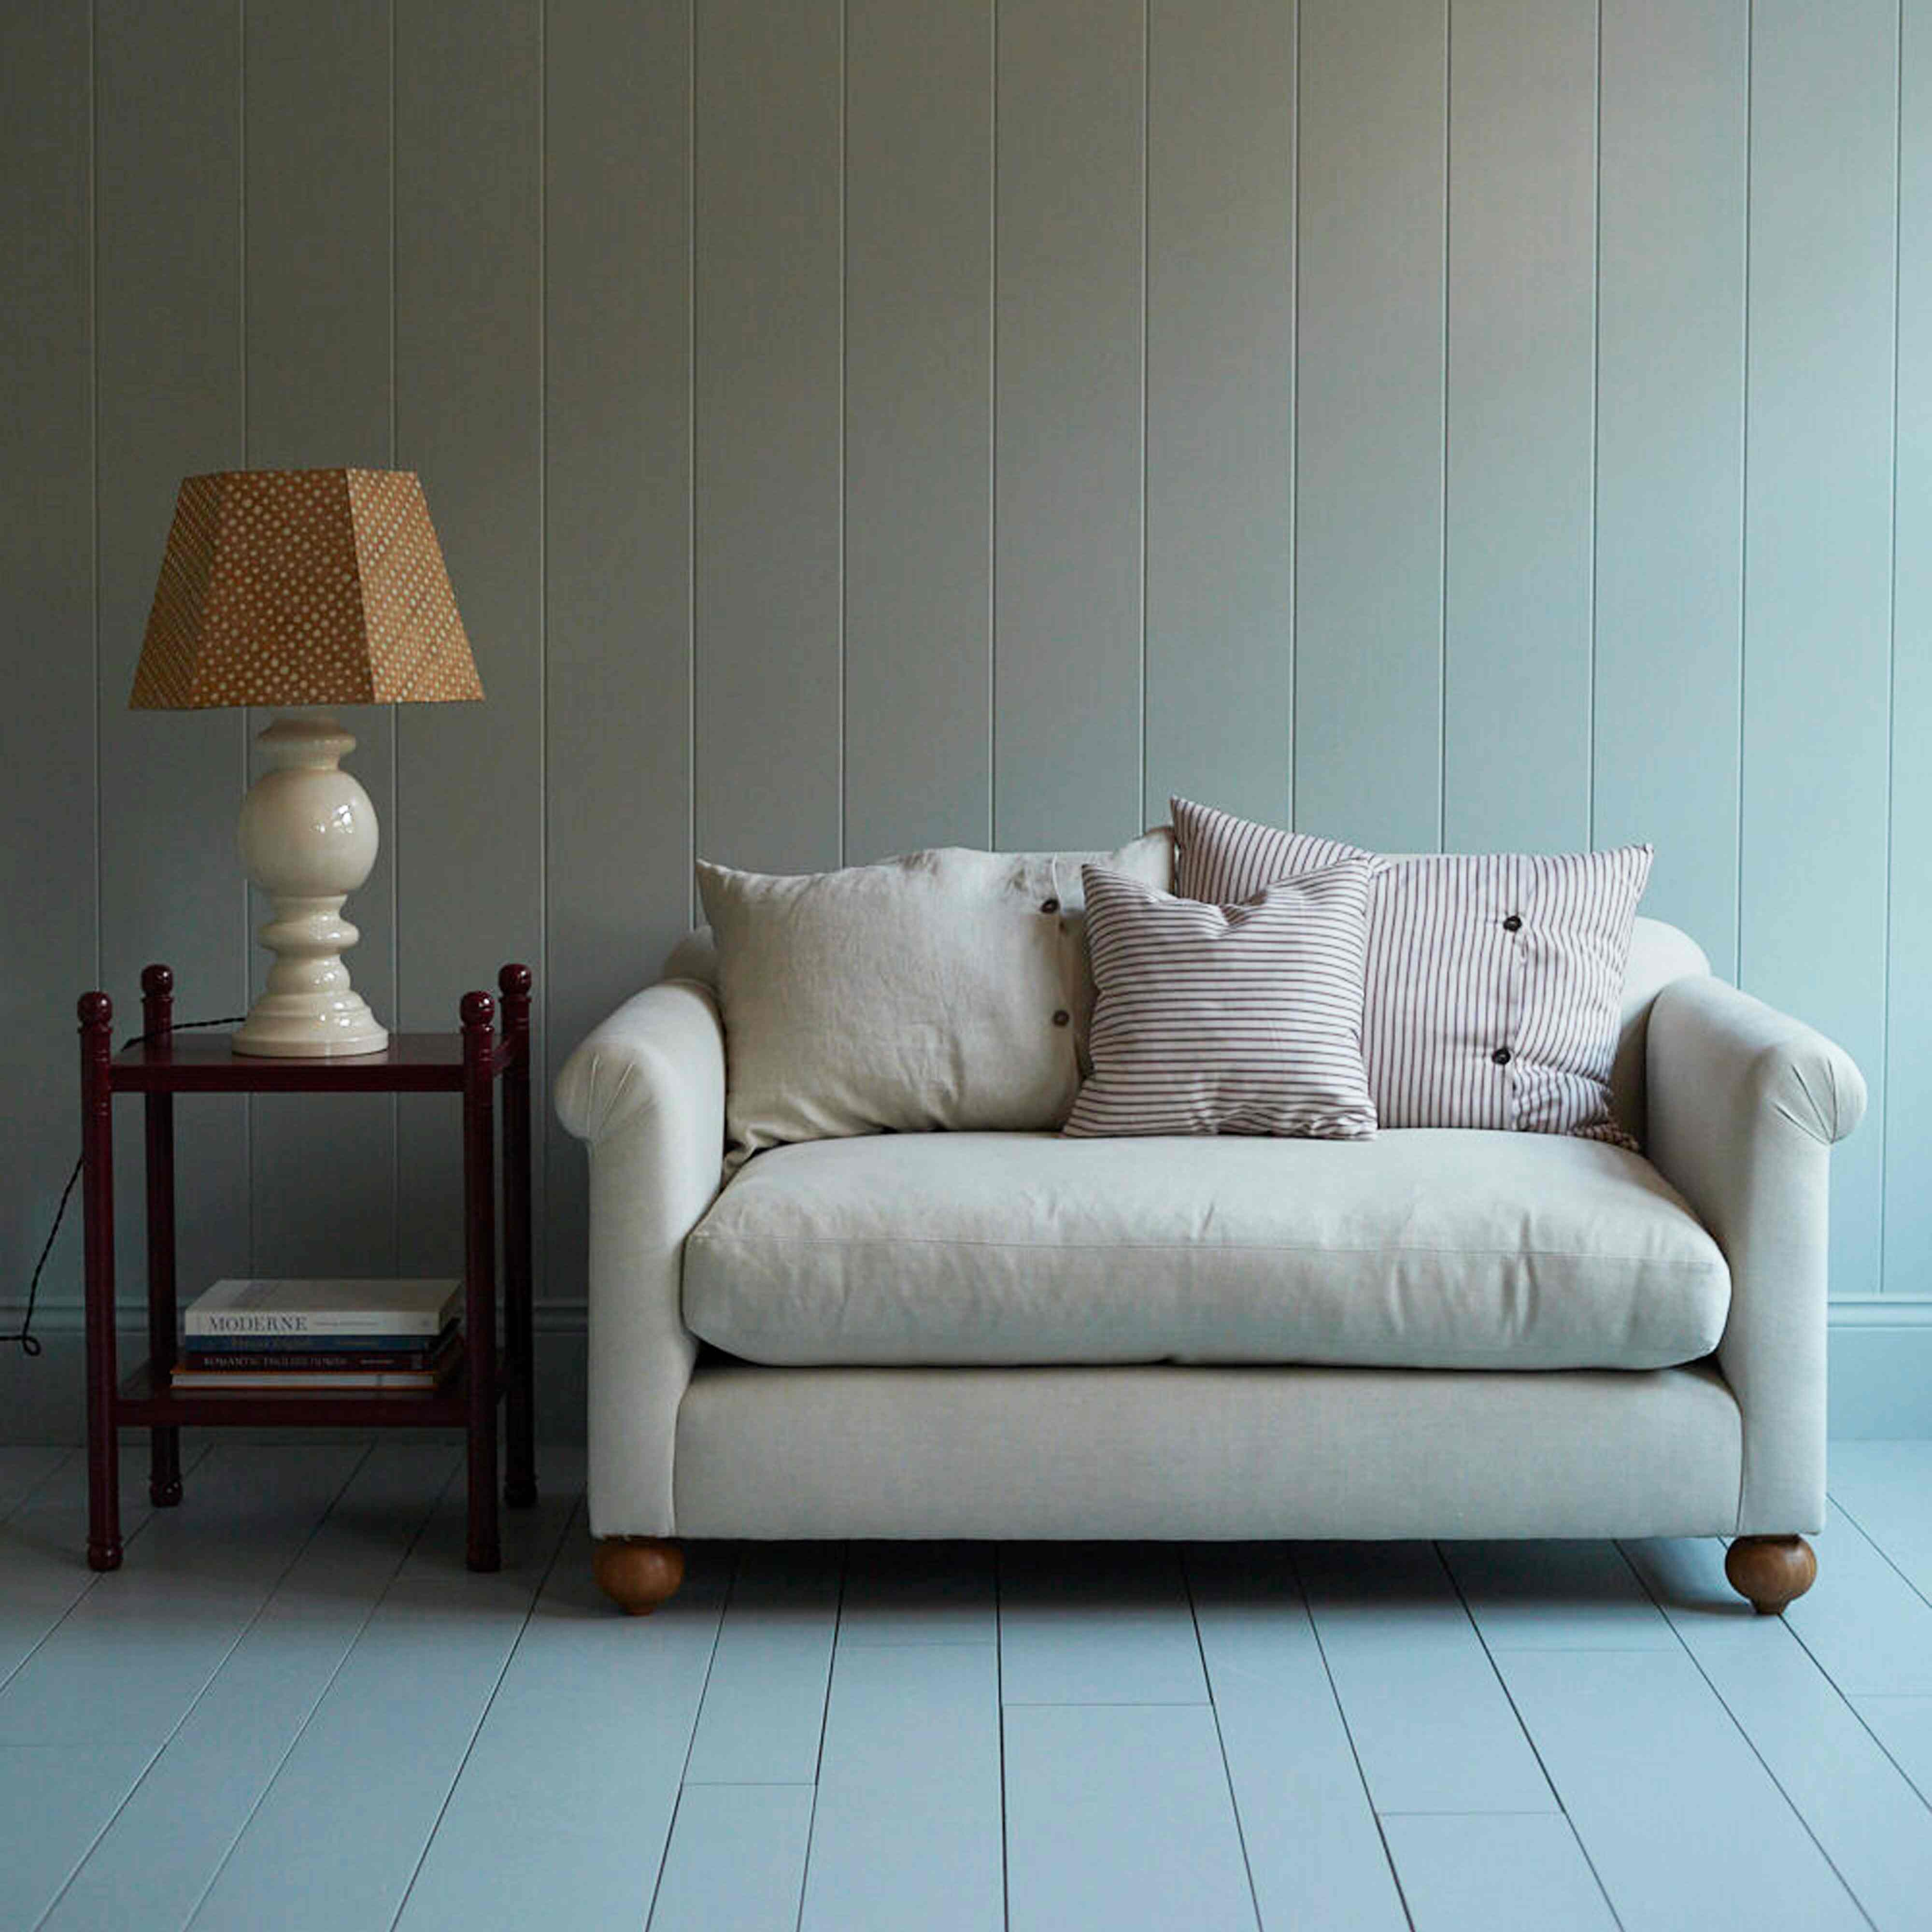  Dolittle 2 Seater Sofa in Laidback Linen Sweet Briar 